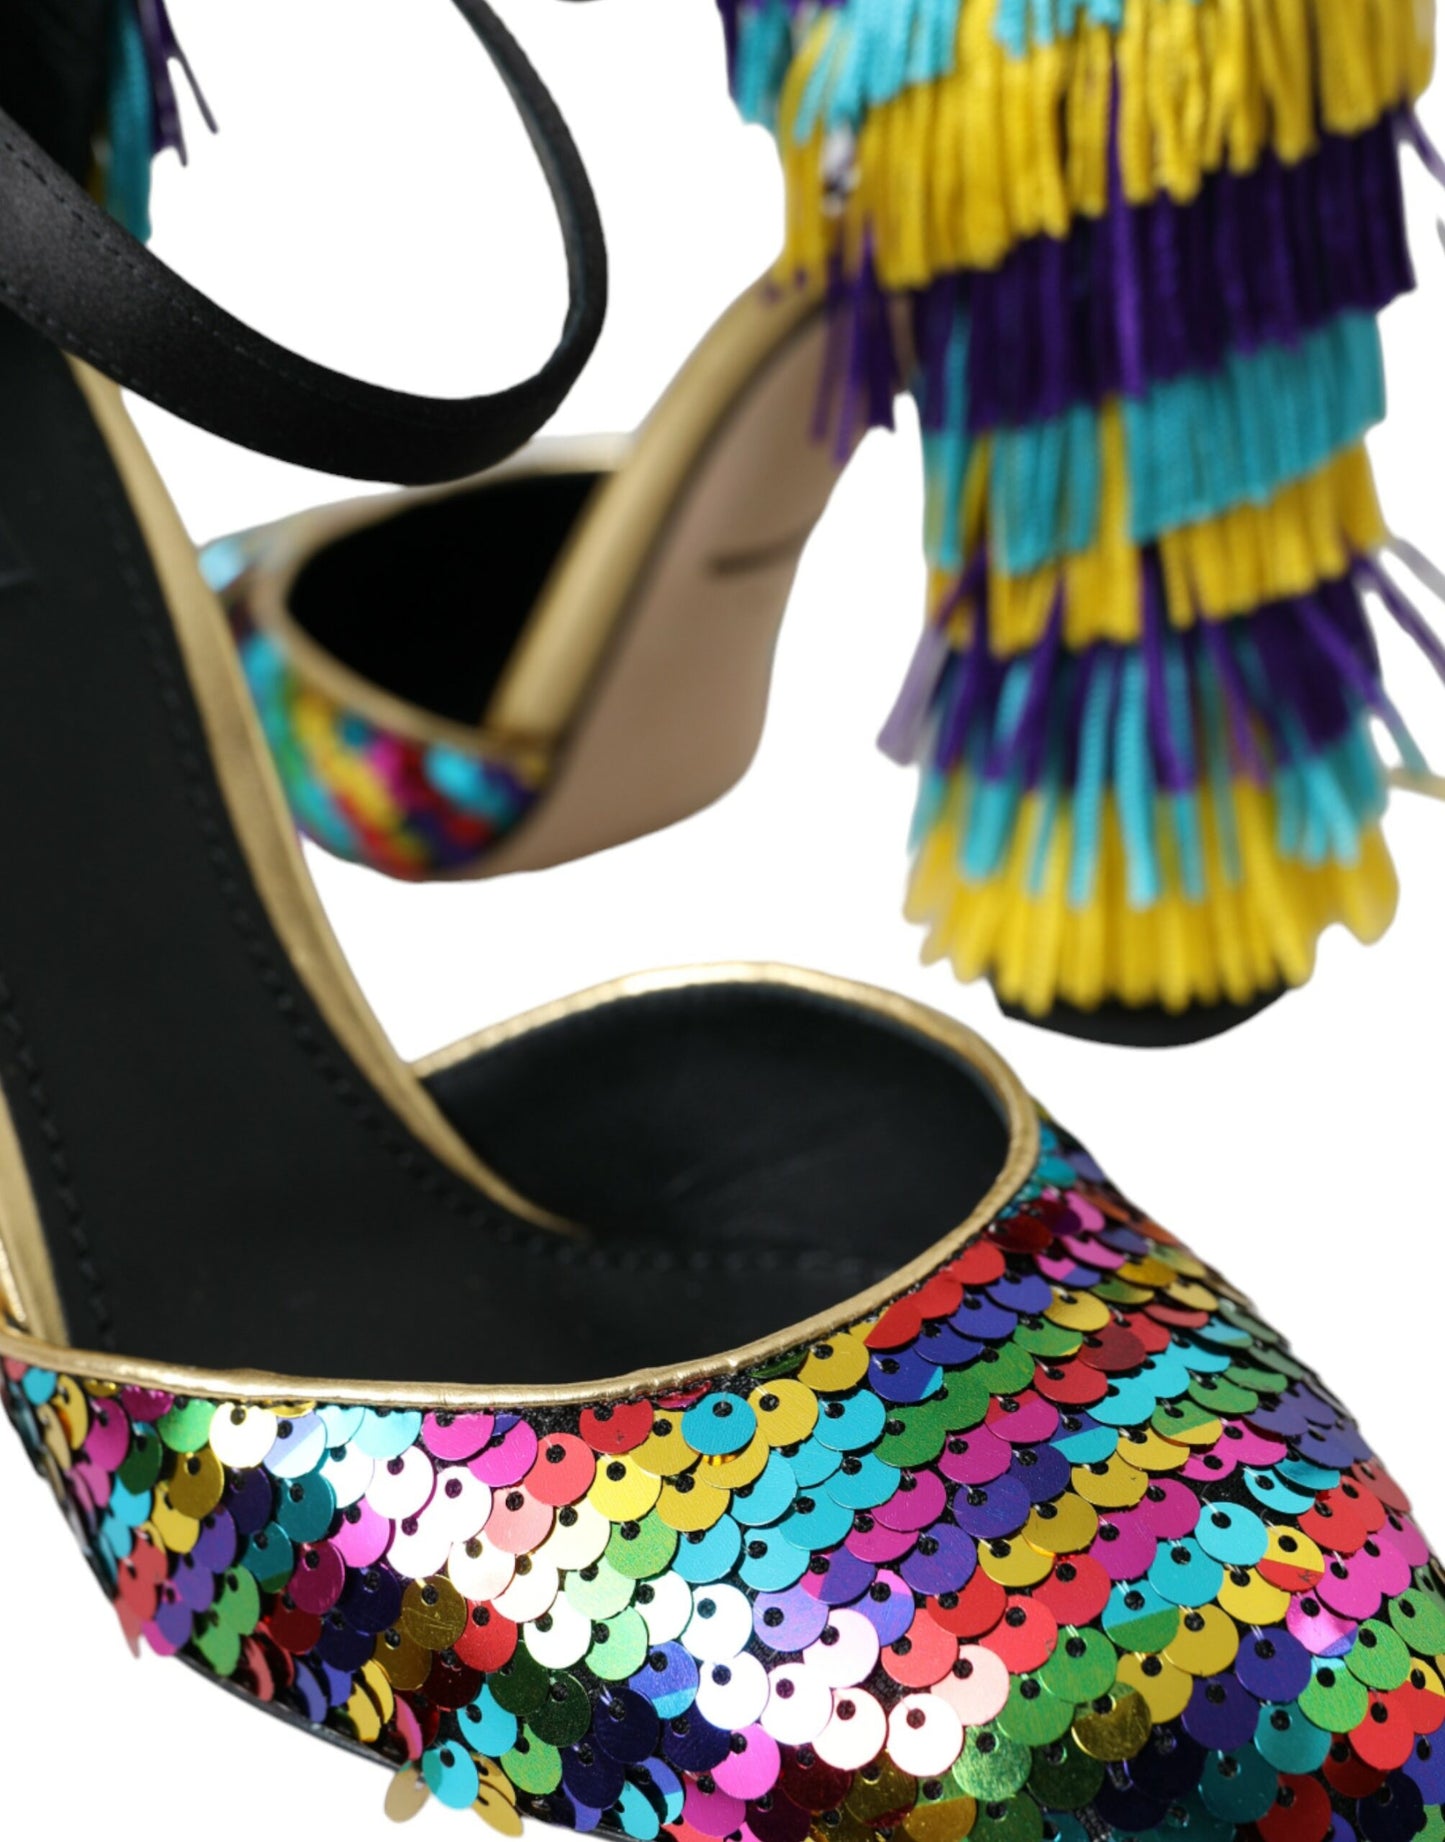 Dolce & Gabbana Multicolor Sequin Crystal Mary Jane Shoes